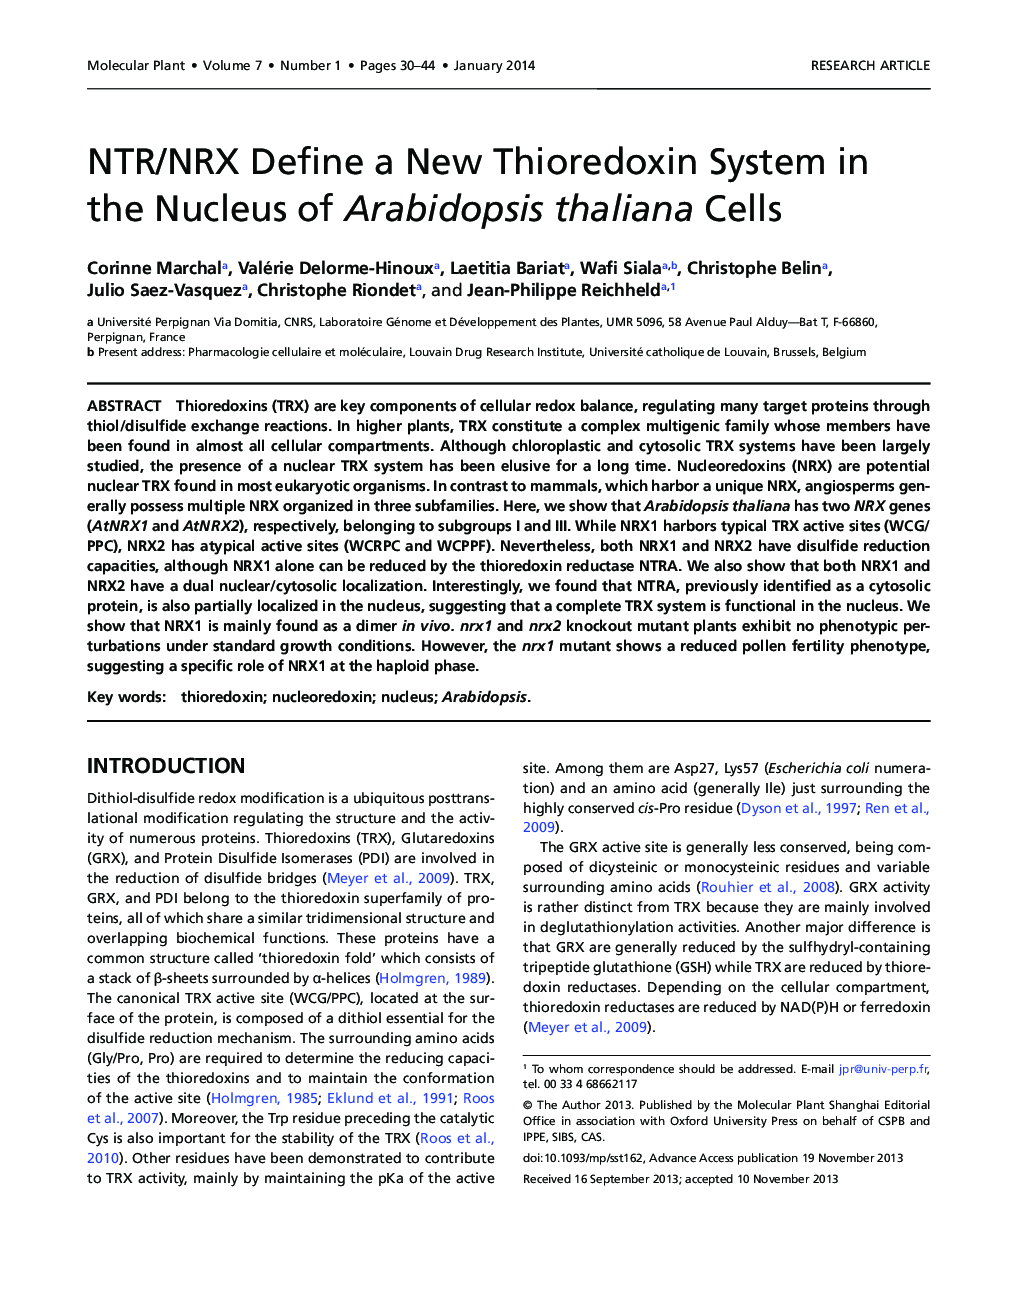 NTR/NRX Define a New Thioredoxin System in the Nucleus of Arabidopsis thaliana Cells 